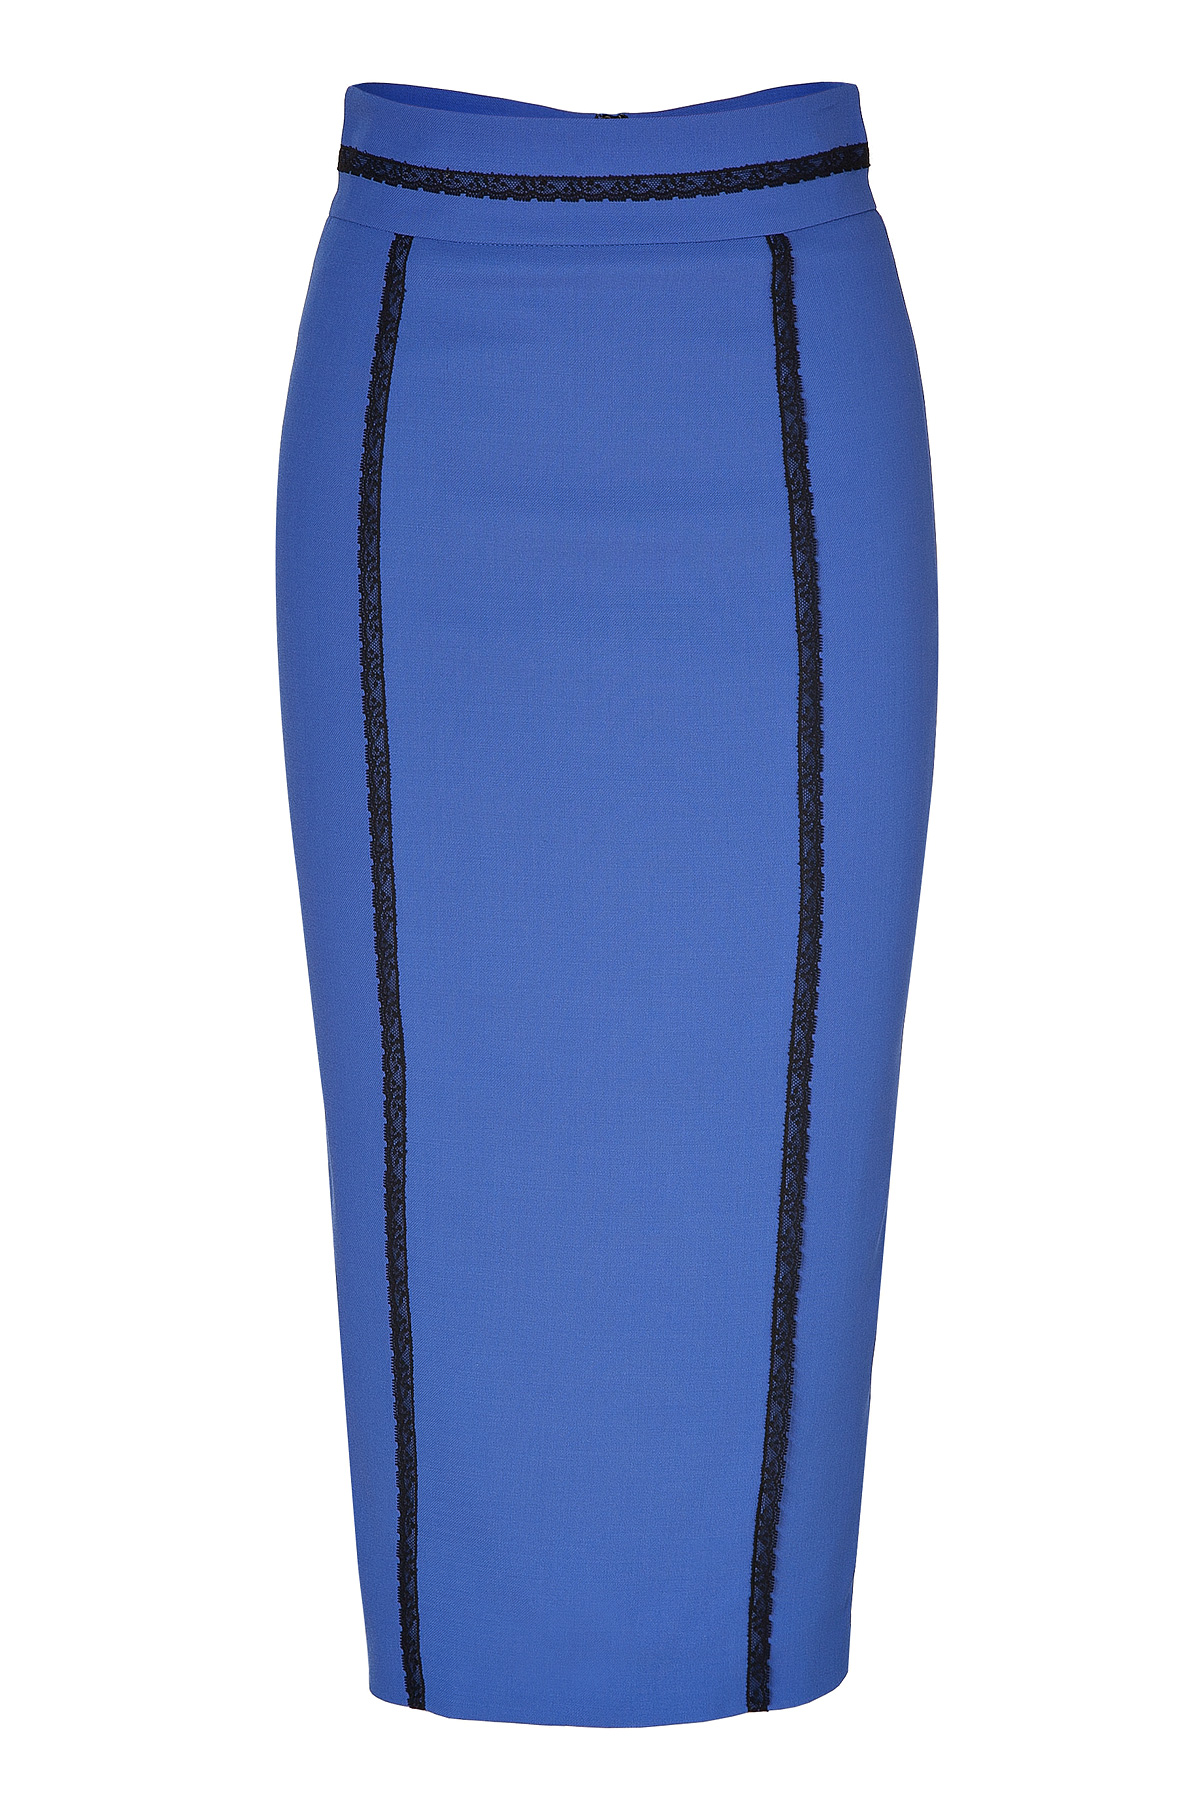 Lyst - L'wren scott High Waisted Pencil Skirt with Lace Trim in Blue